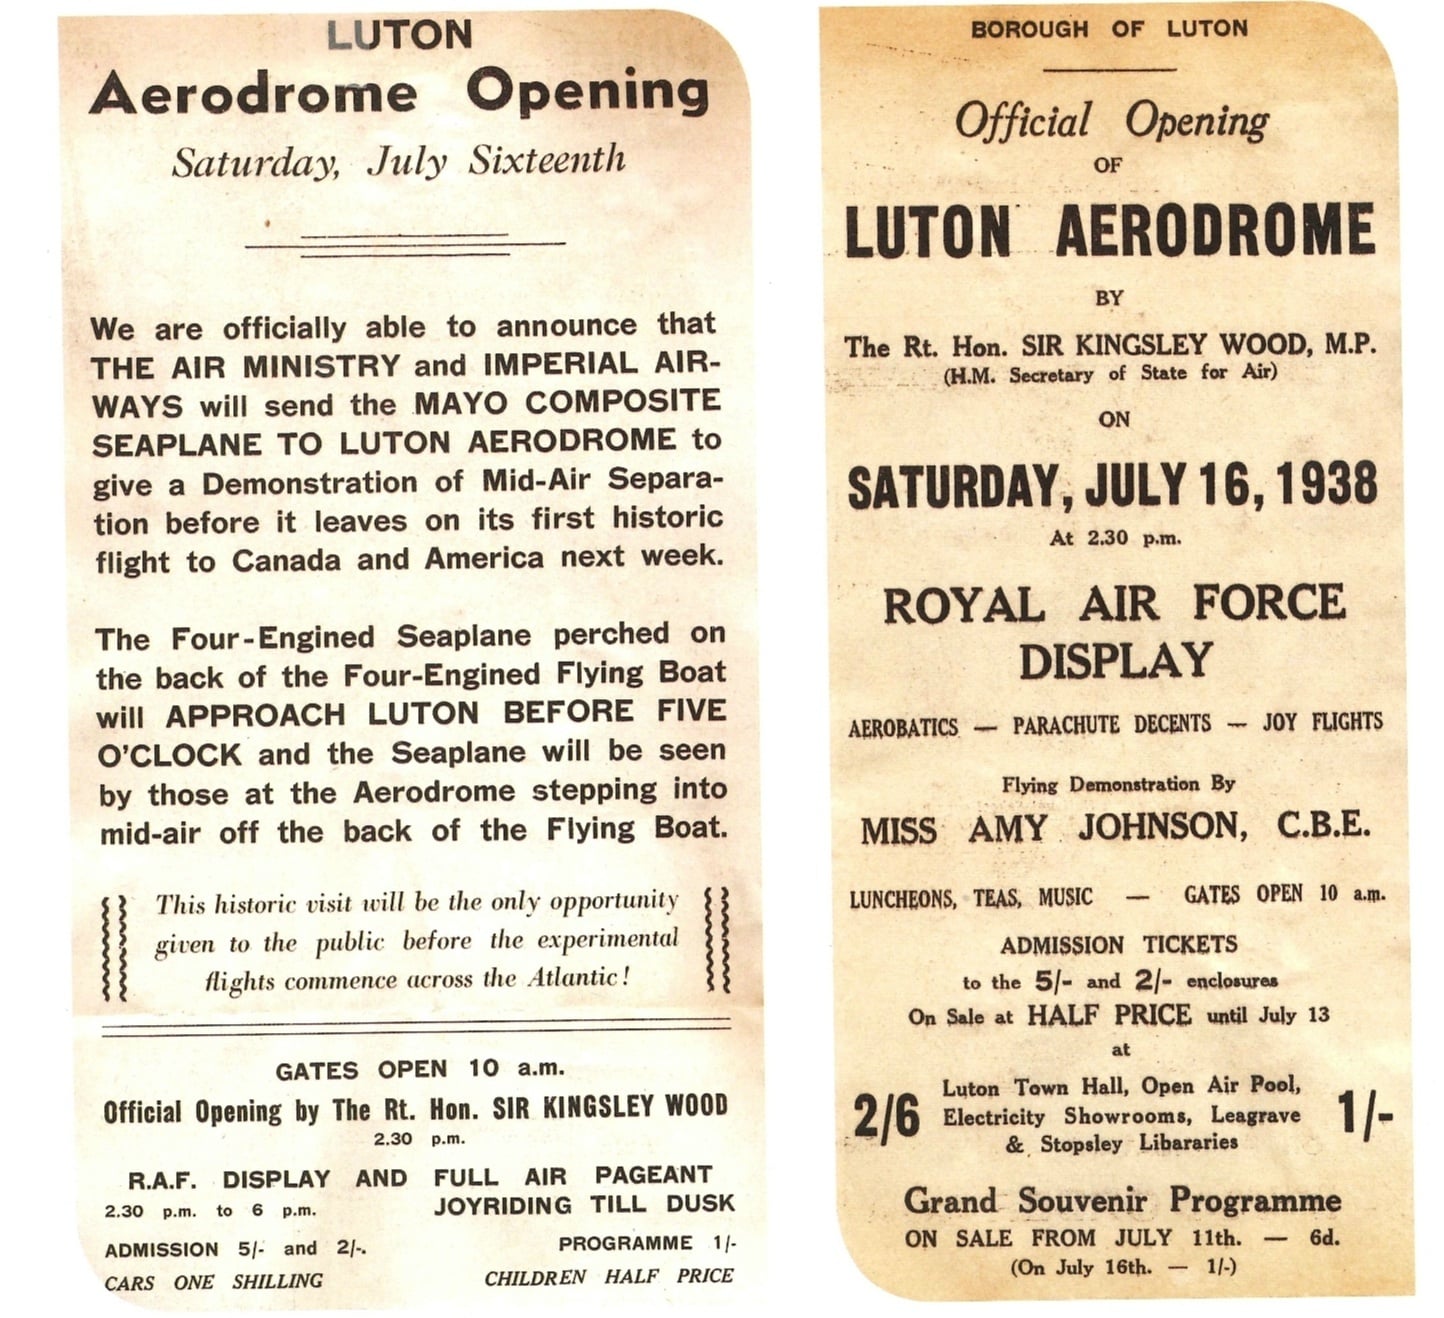 Newspaper articles from the opening of Luton Aerodrome.